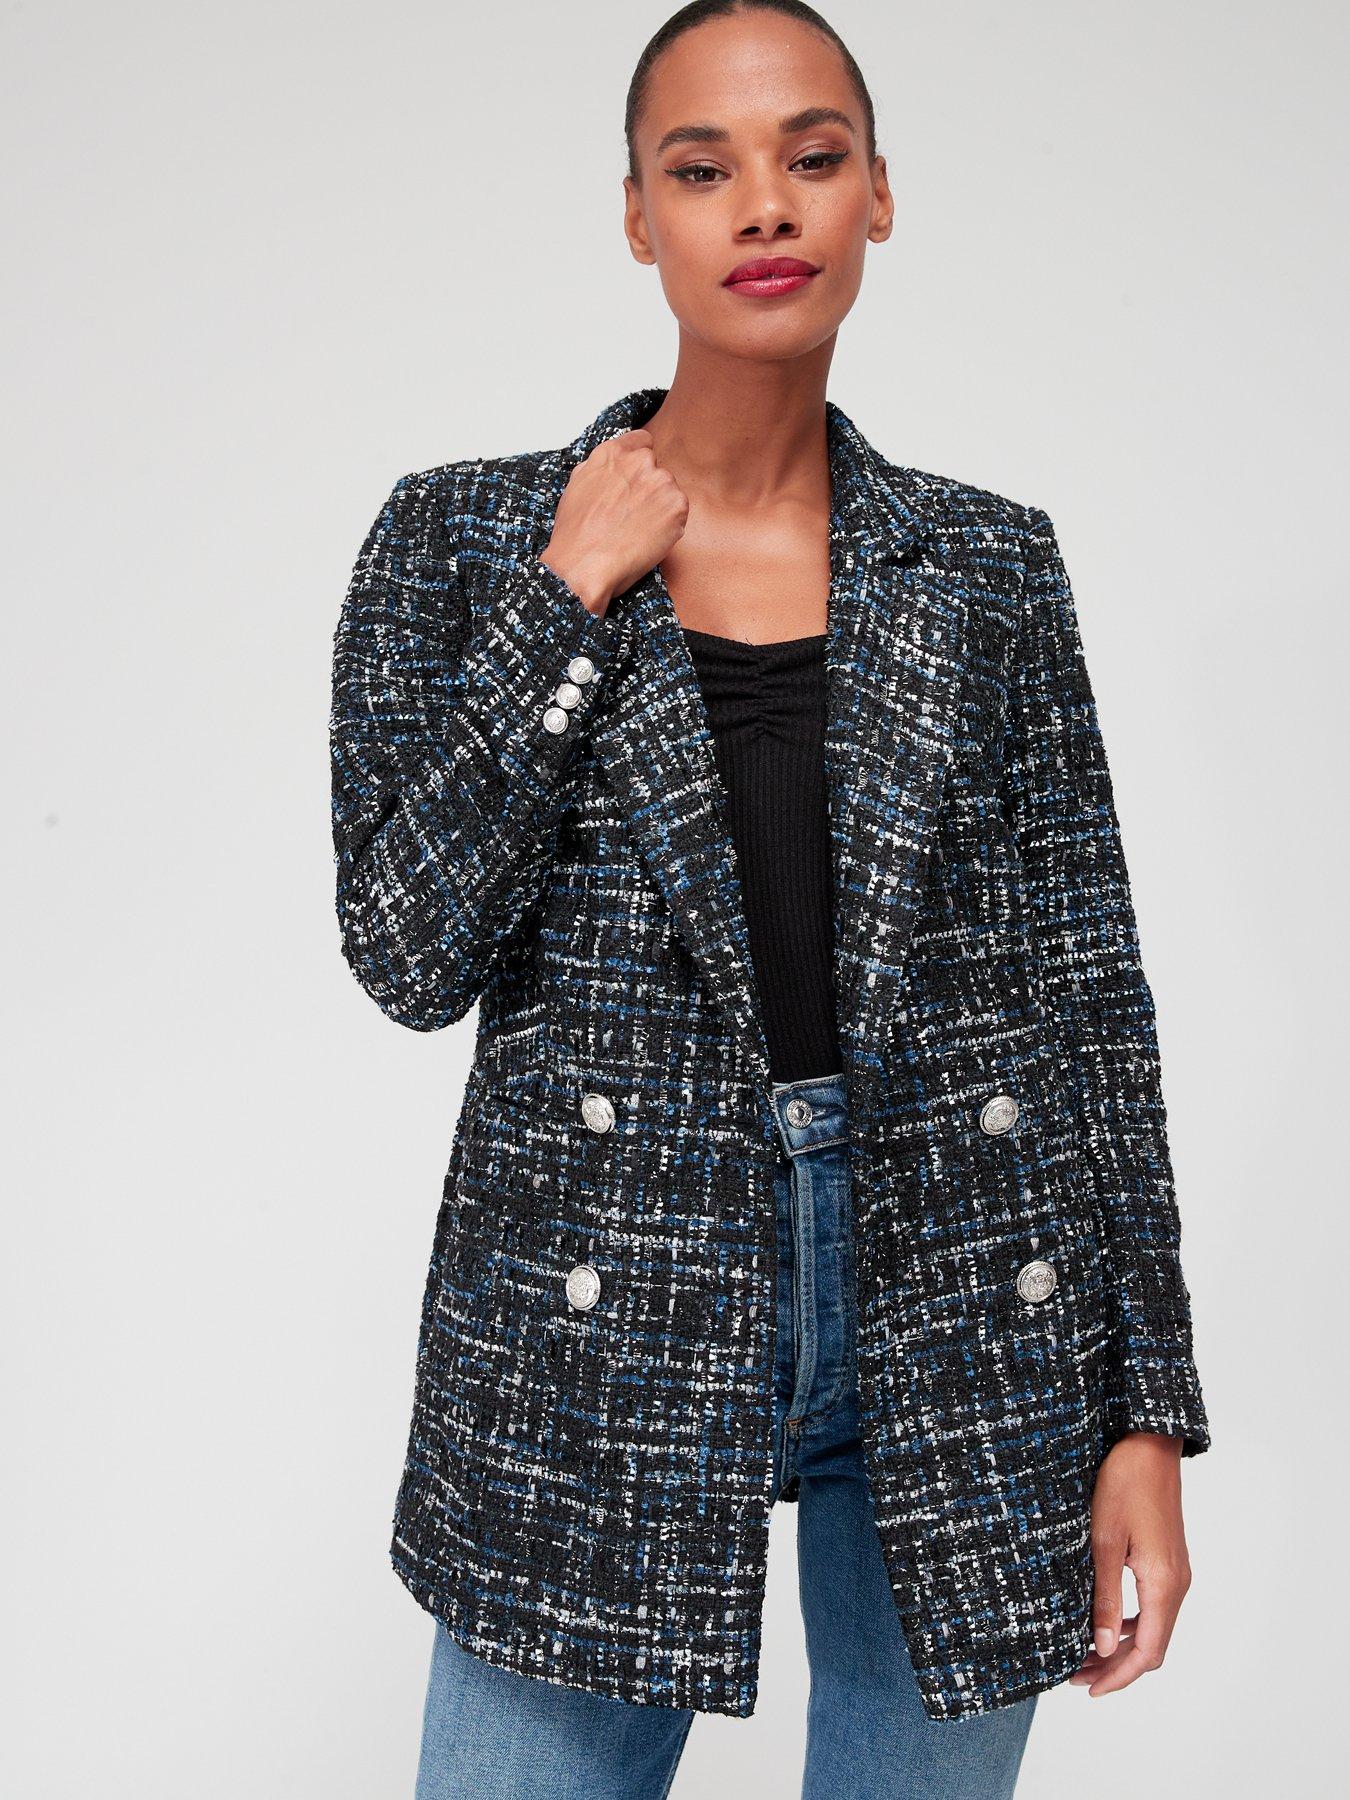 Womens Clothing Jackets Blazers Black Burberry Wool Jacket With All-over Check Pattern in Dark Charcoal - Save 50% sport coats and suit jackets 